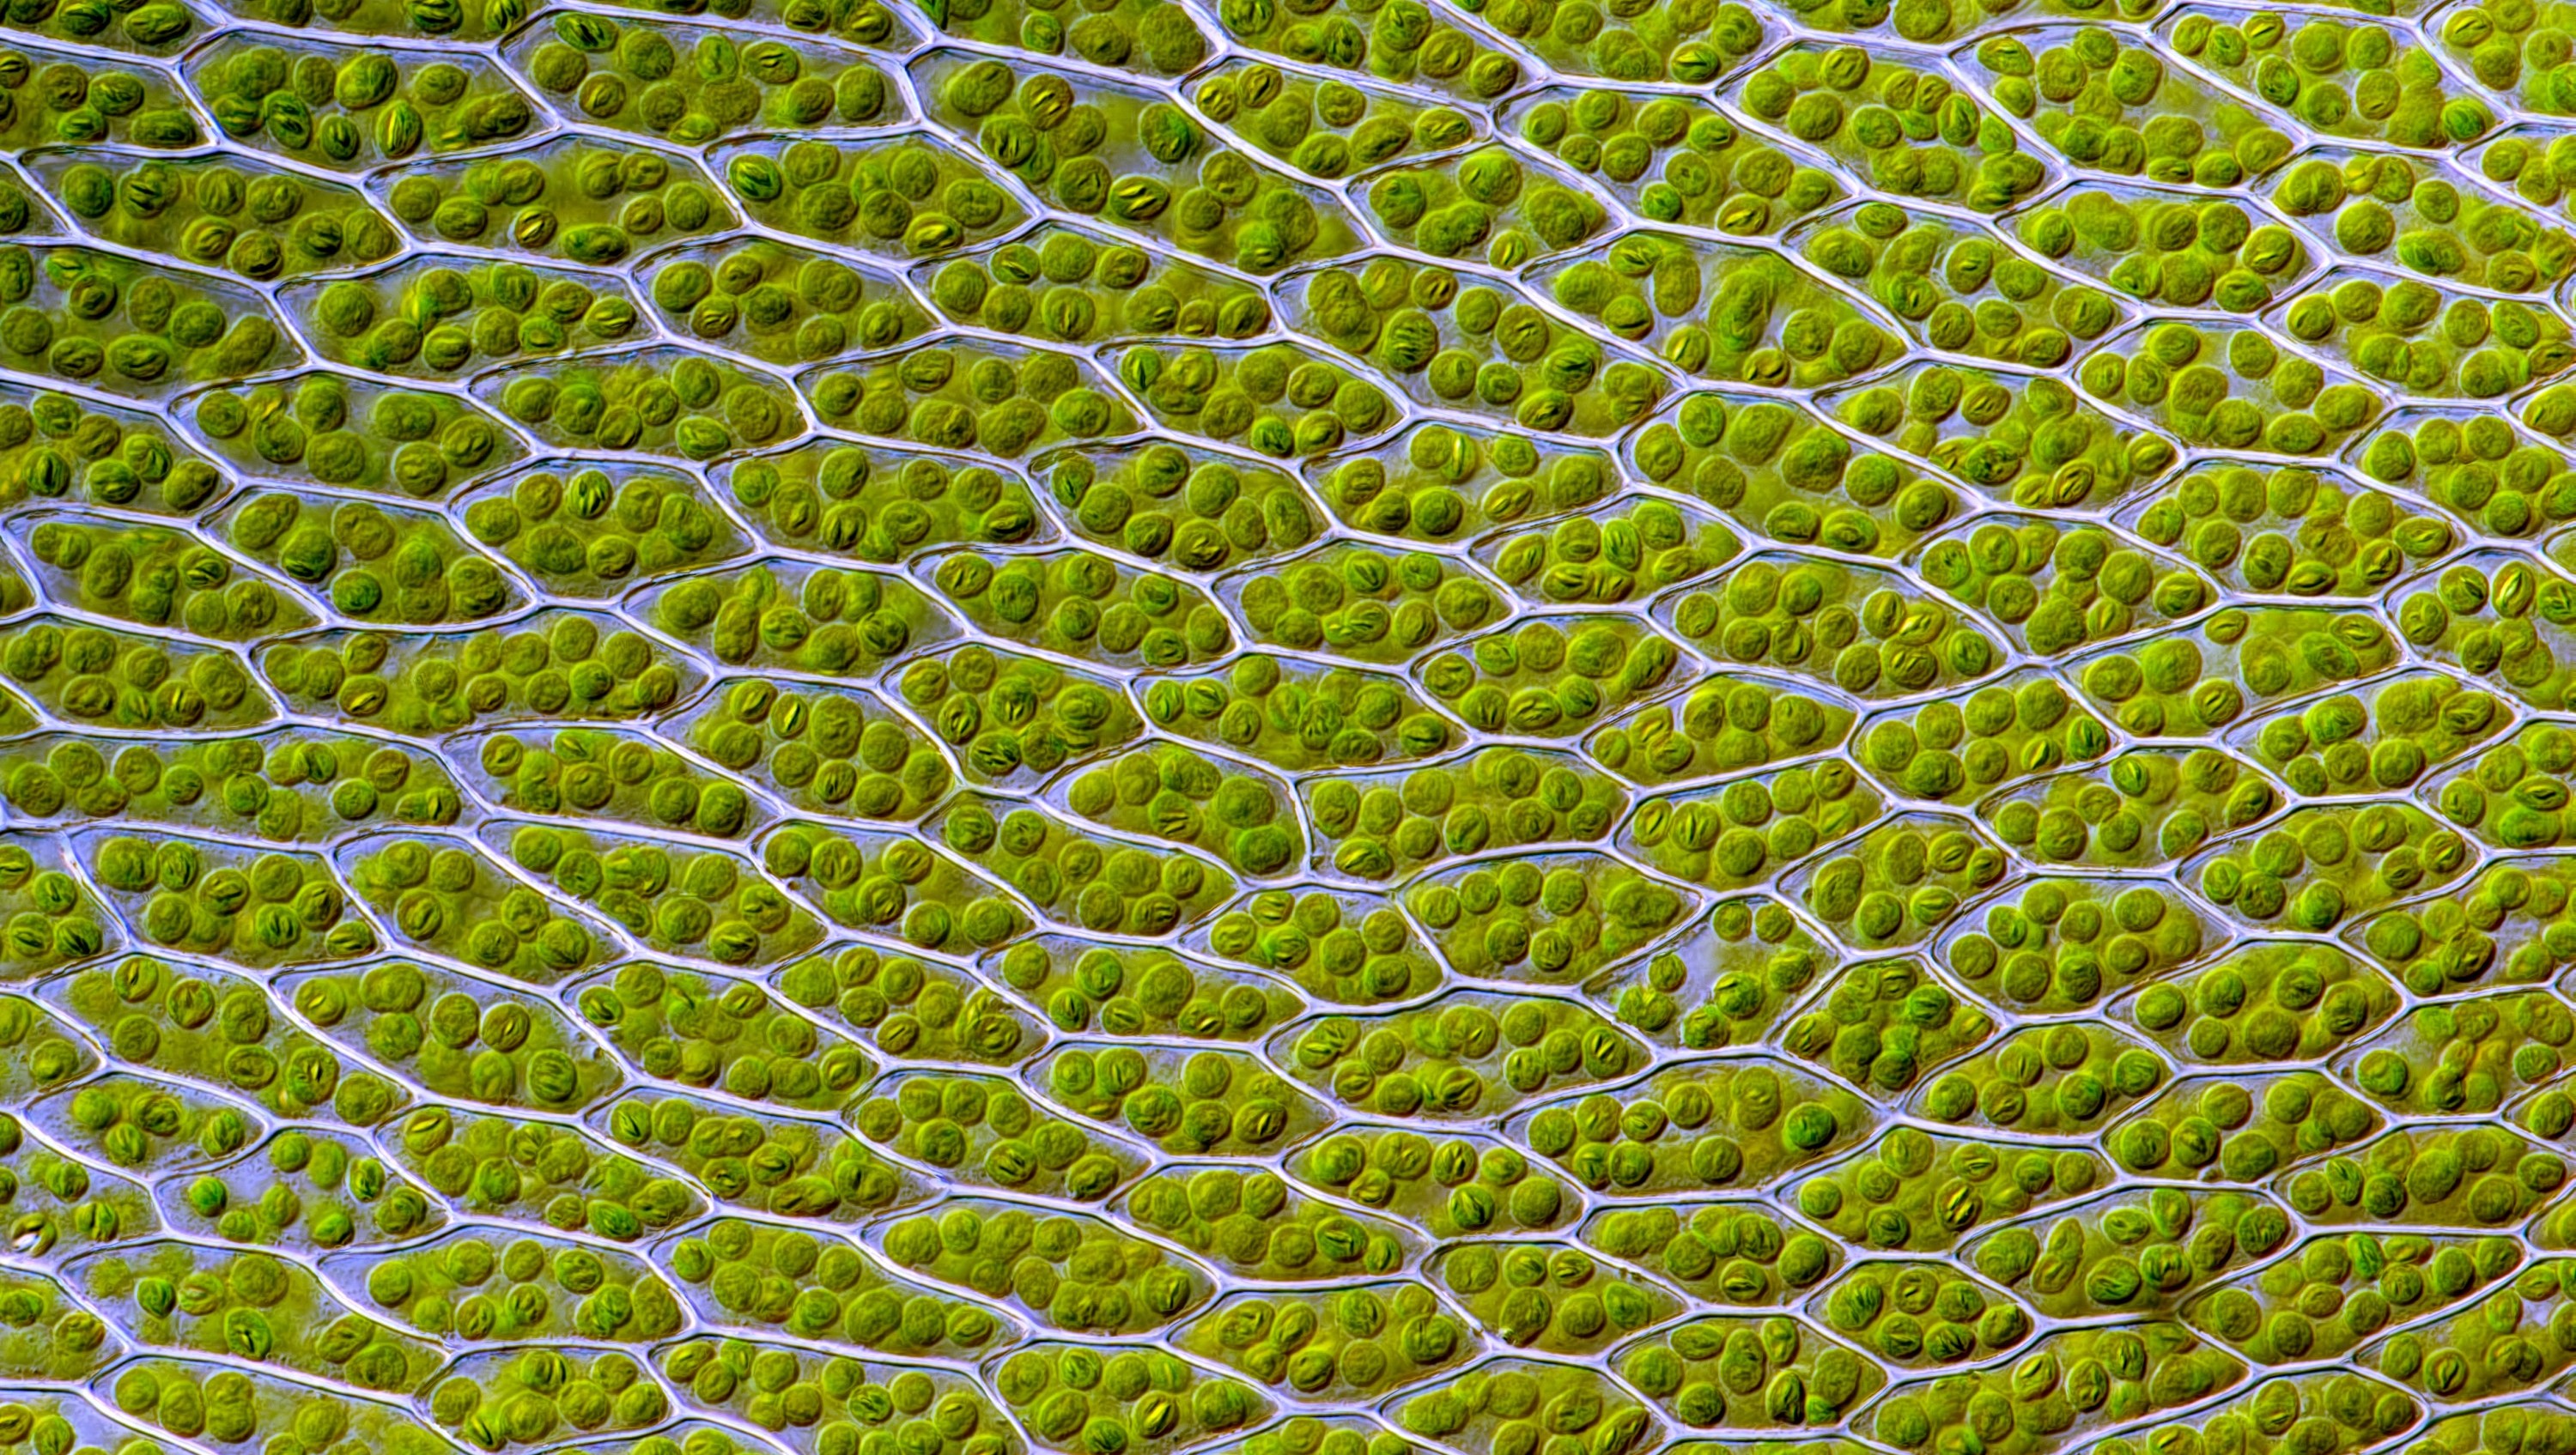 Live leaf cells of the moss Bryum capillare, showing abundant chloroplasts (green spherical bodies) and their accumulated starch granules (Des Callaghan/Wikimedia Commons)